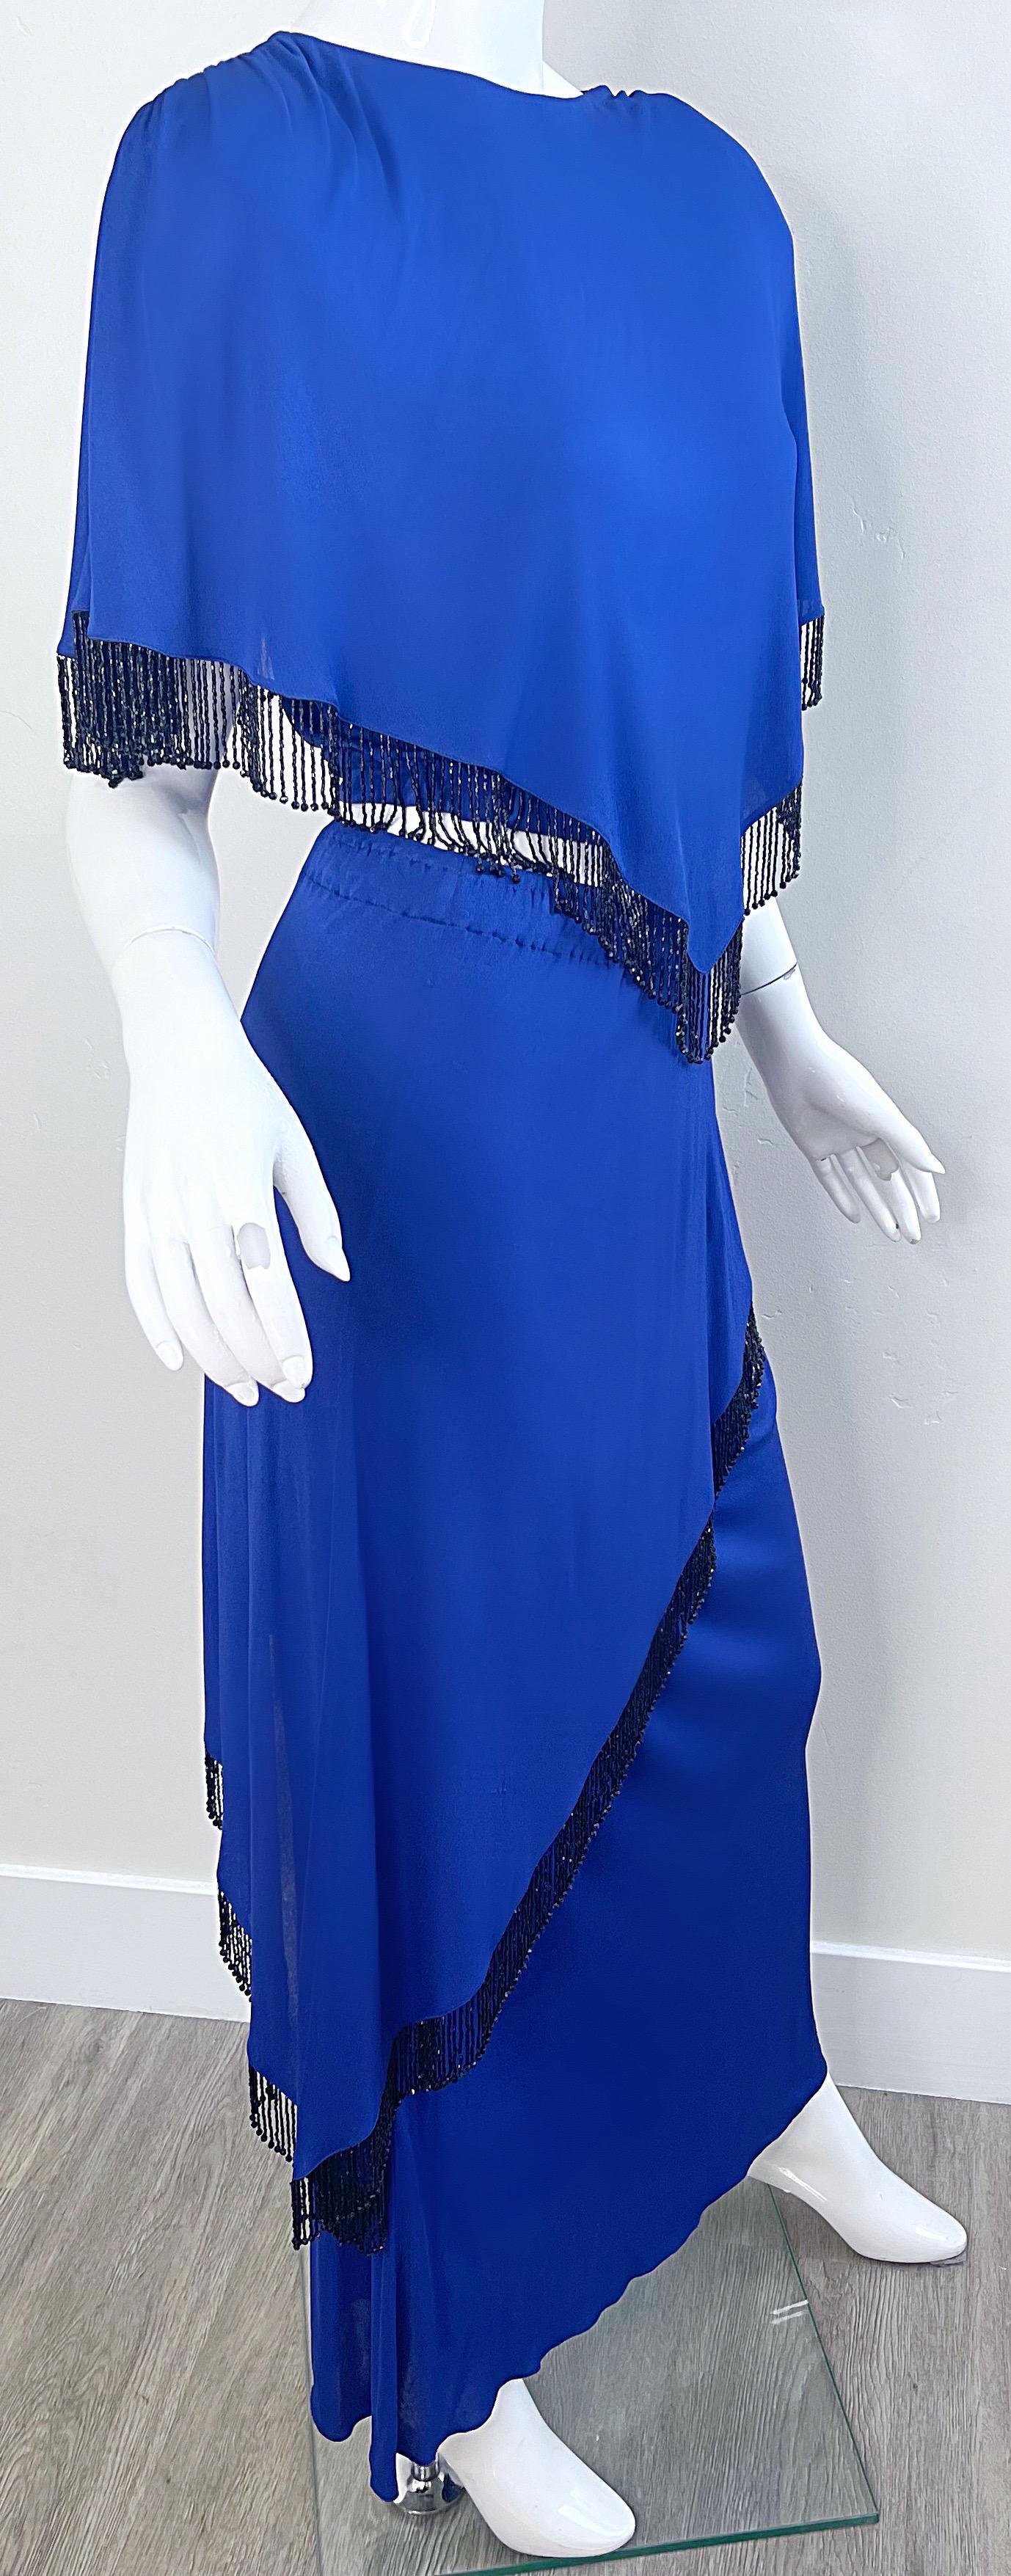 Holly’s Harp 1970s Royal Blue Silk Jersey Beaded 3 Piece Vintage 70s Ensemble For Sale 11